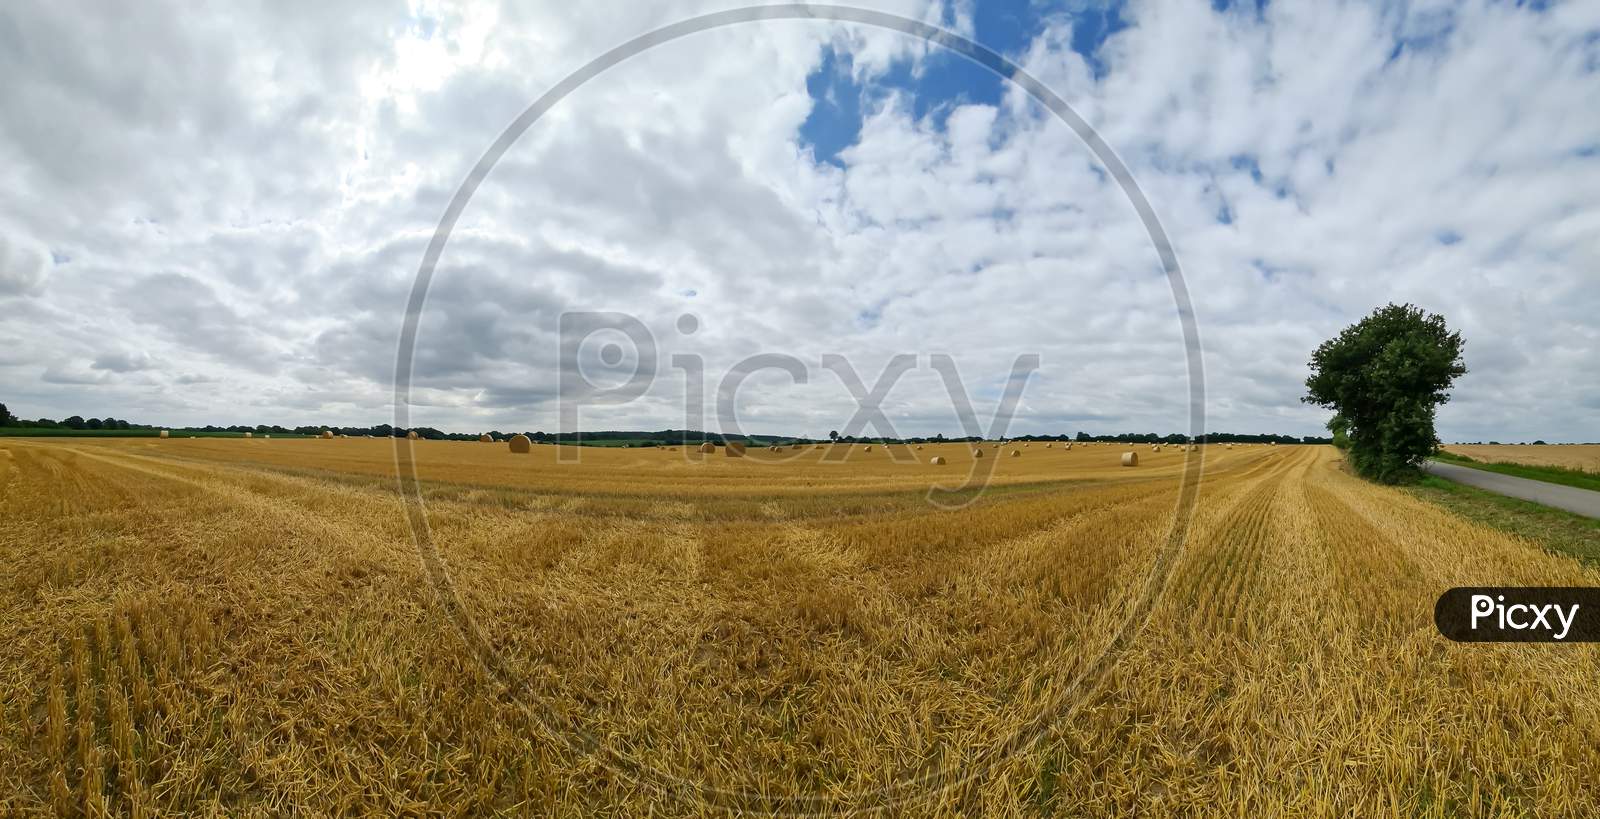 Summer View On An Agricultural Wheat Field With Straw Bales Been Harvested